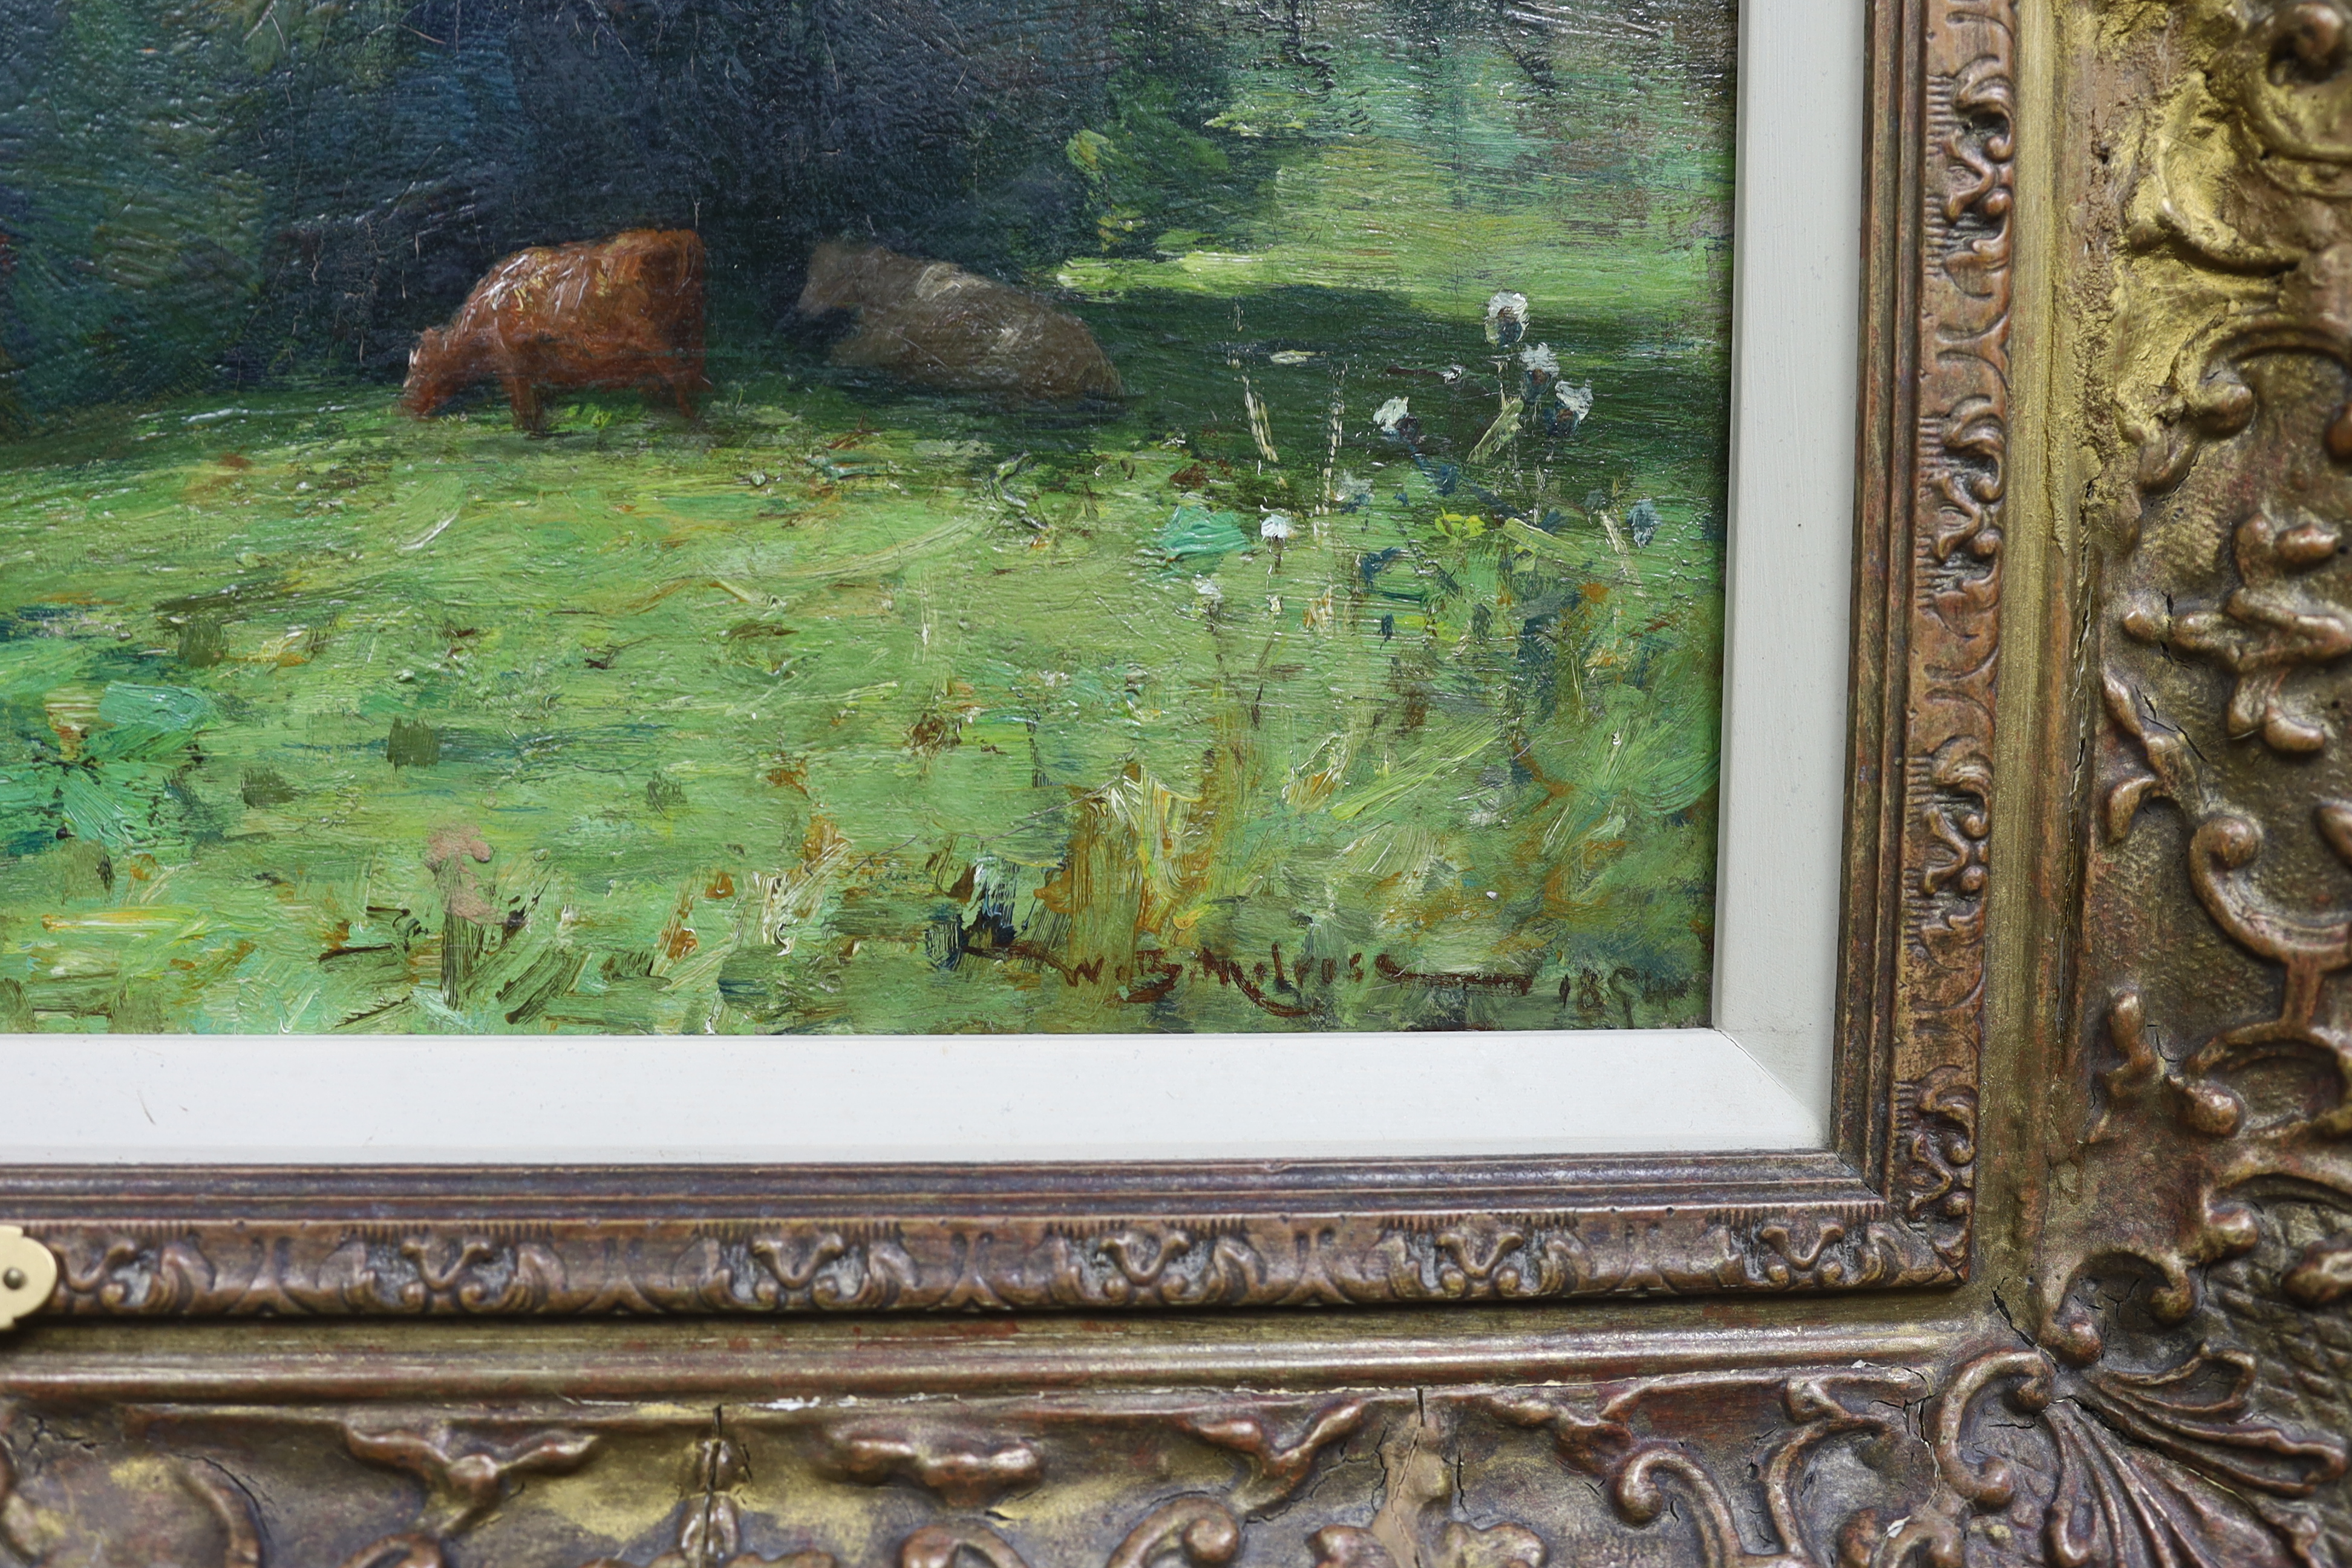 Walter Brodie Melrose (19th C.), oil on canvas, 'Cattle by a stream, 1894', signed and dated 1894, 29 x 44cm. Condition - good, some surface dirt